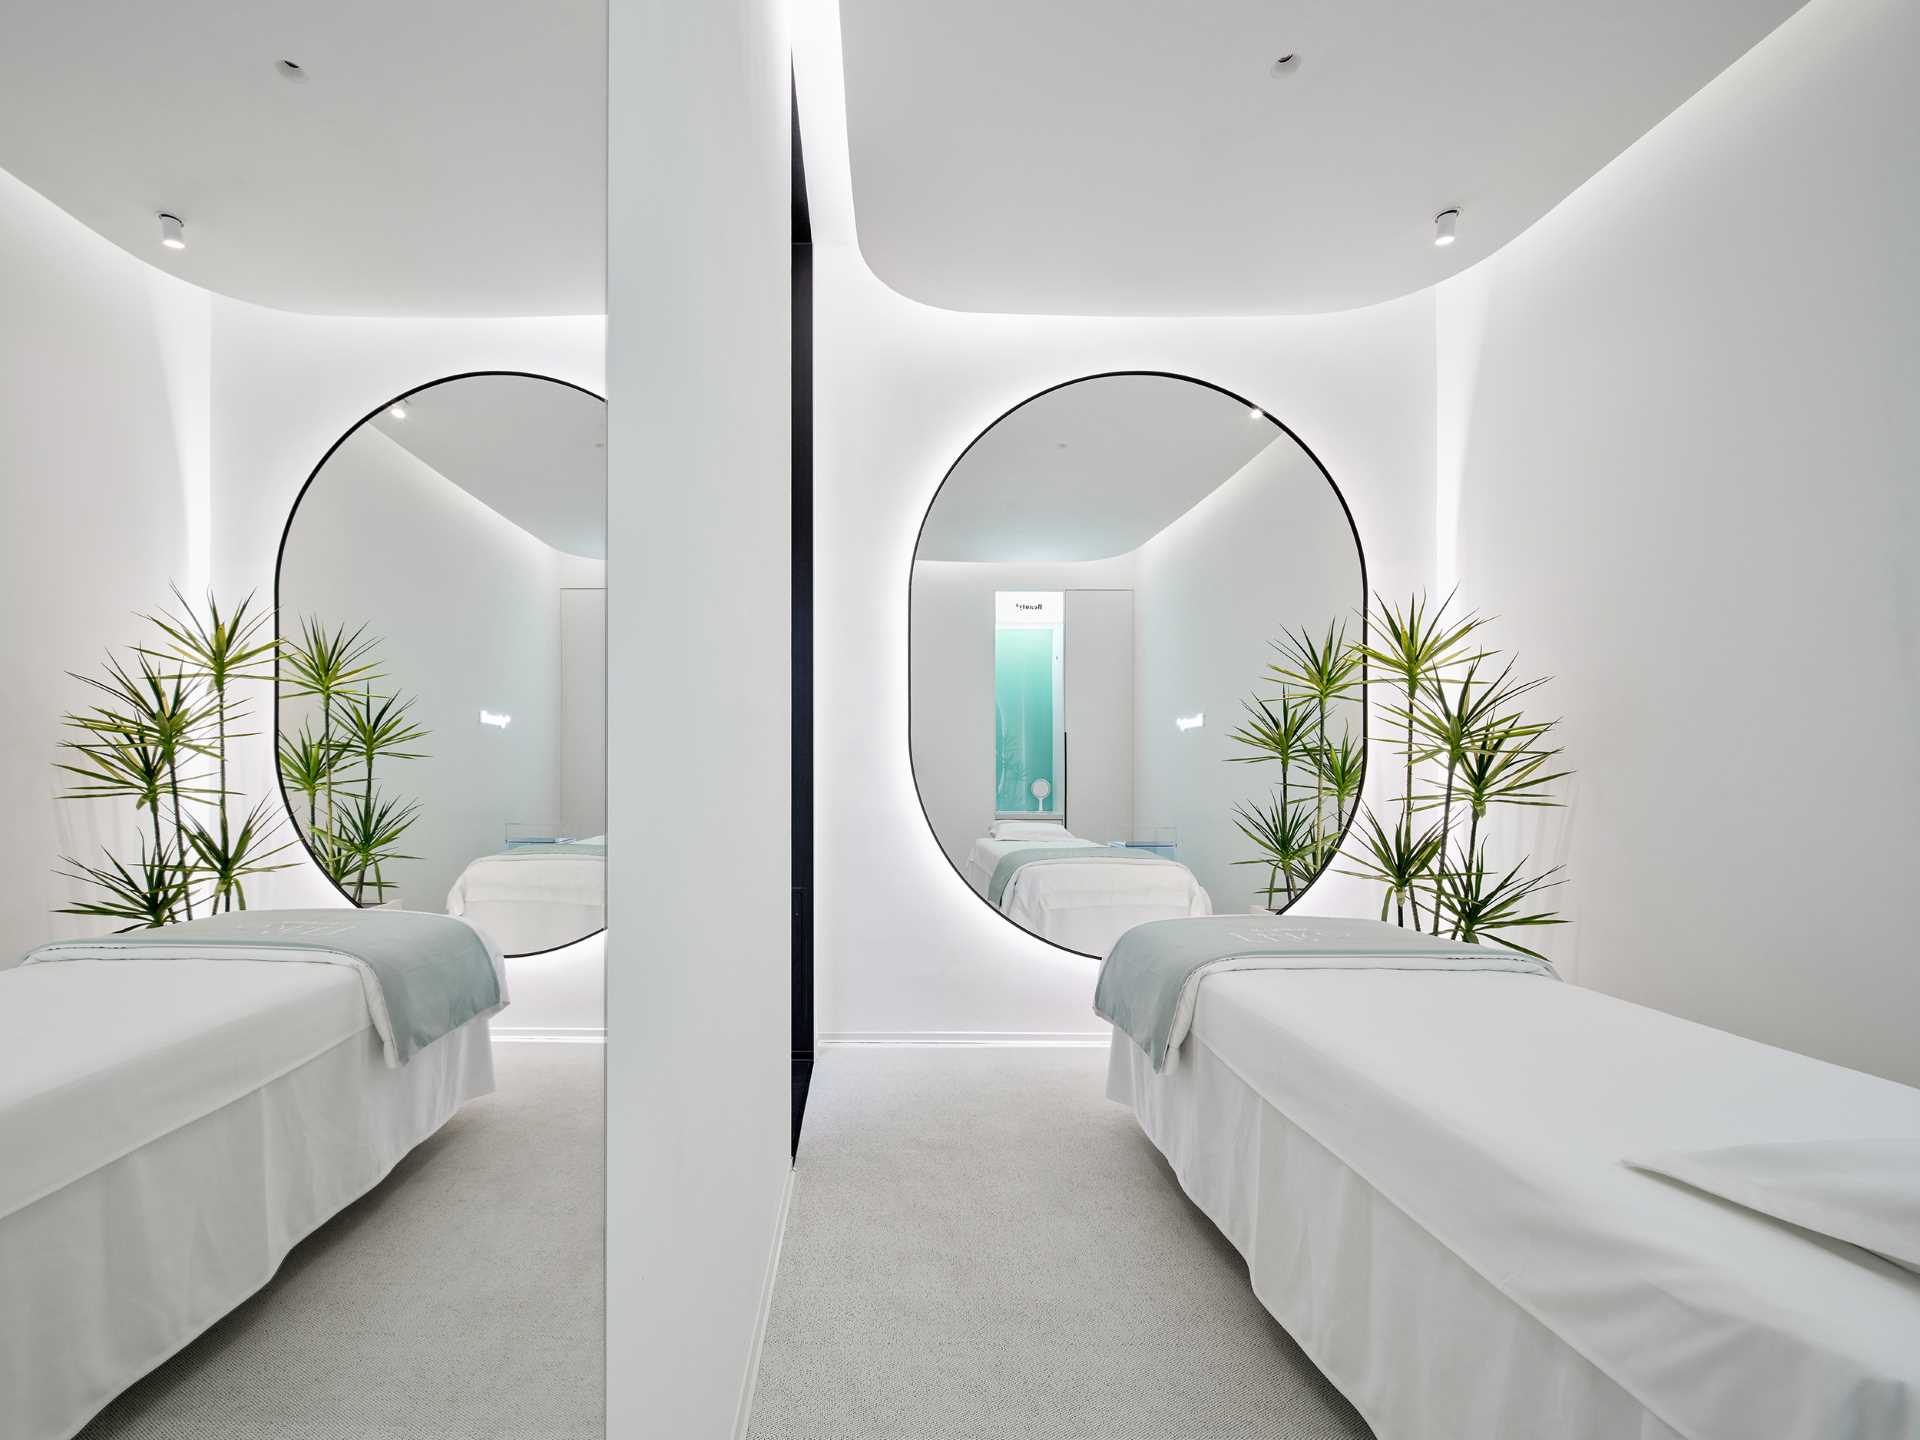 The single-person treatment room has a rectangular layout with a rounded ceiling detail to soften the corners. A large mirror makes the space feel larger, while the opposite wall features a blue-green gradient glass accent.